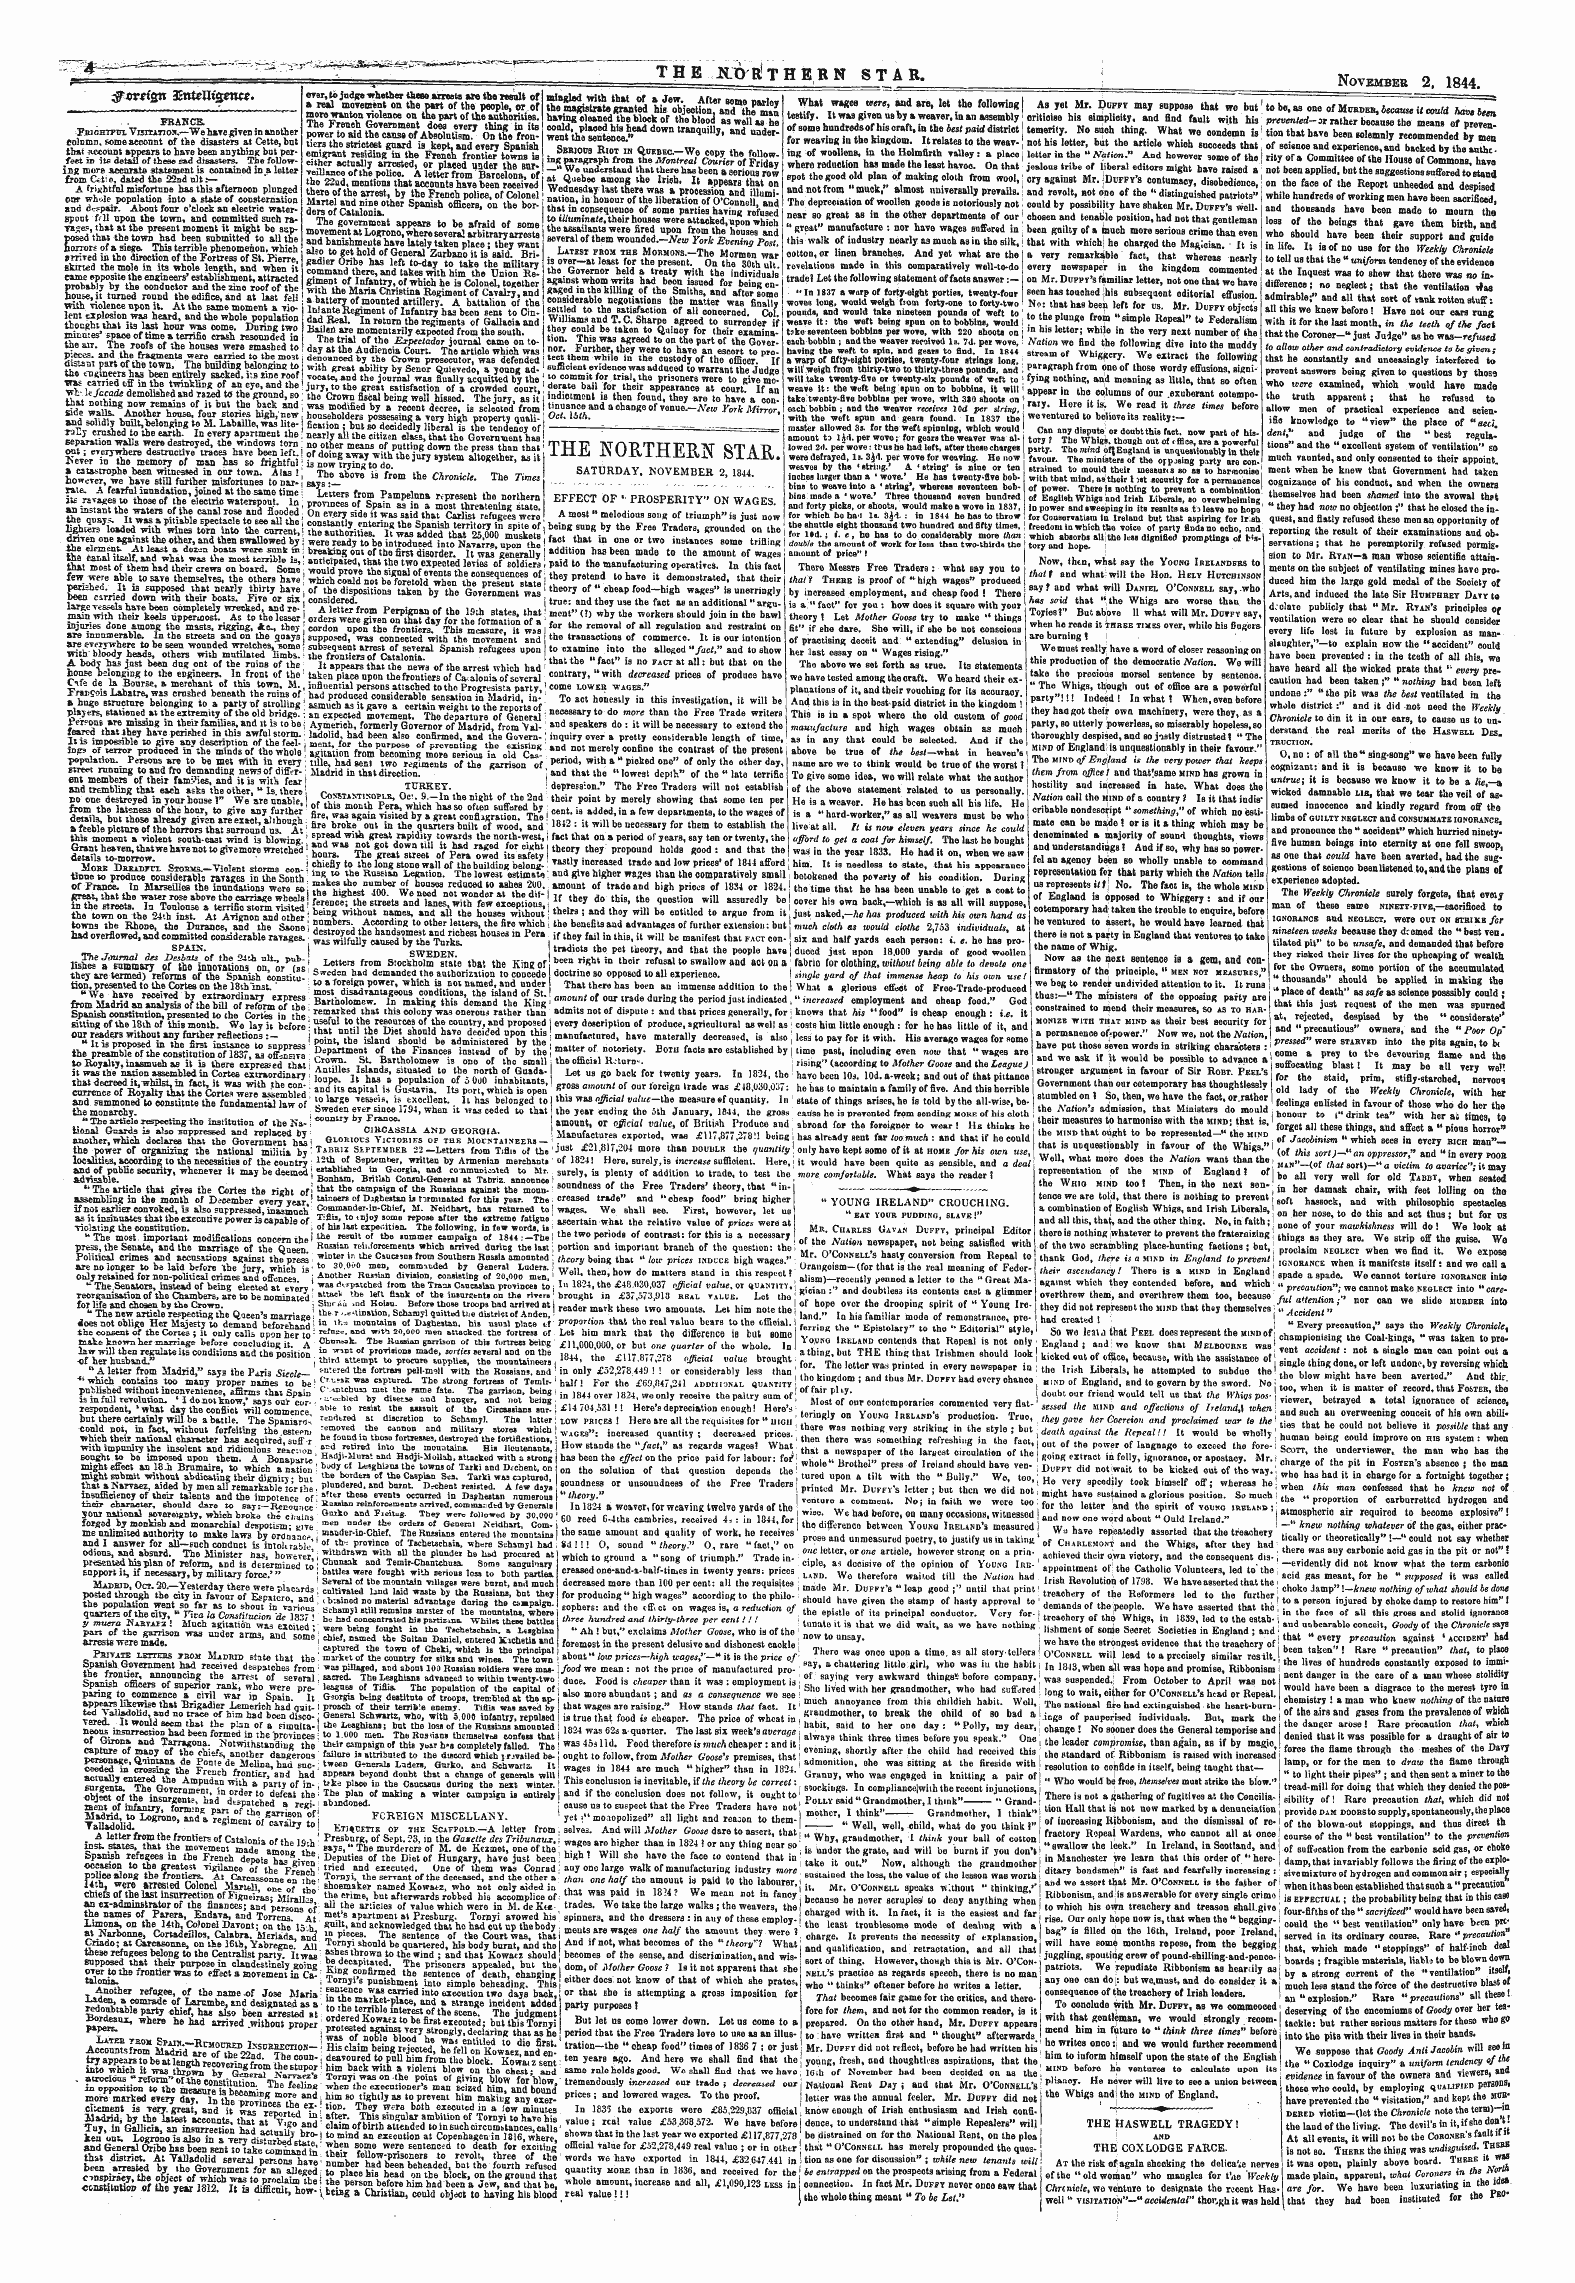 Northern Star (1837-1852): jS F Y, 1st edition - The Northern Star. Saturday, November 2, 1844.